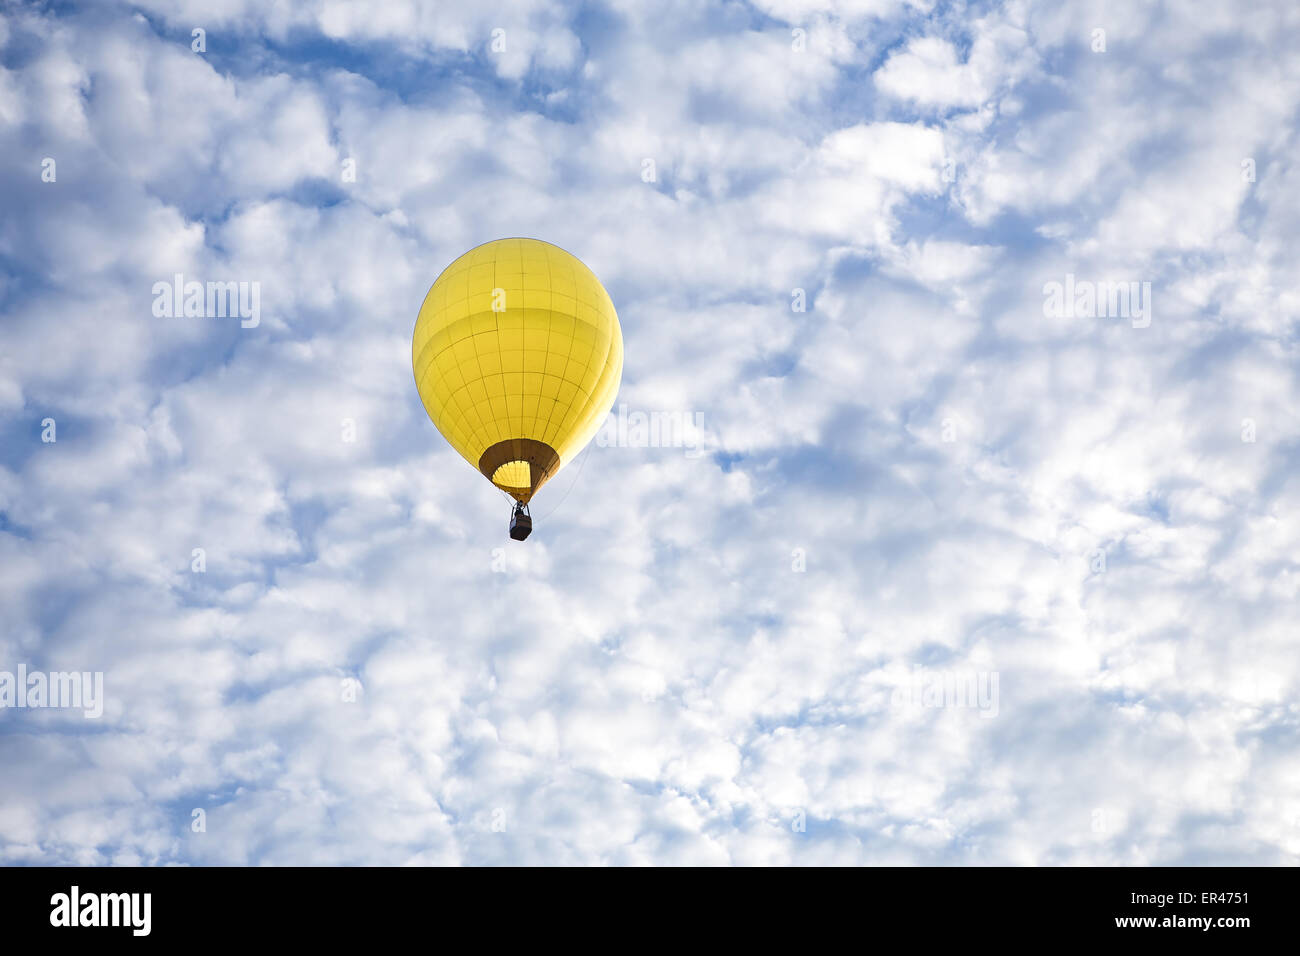 Yellow hot air balloon ascends into a blue sky with puffy white clouds, early in the morning. Stock Photo